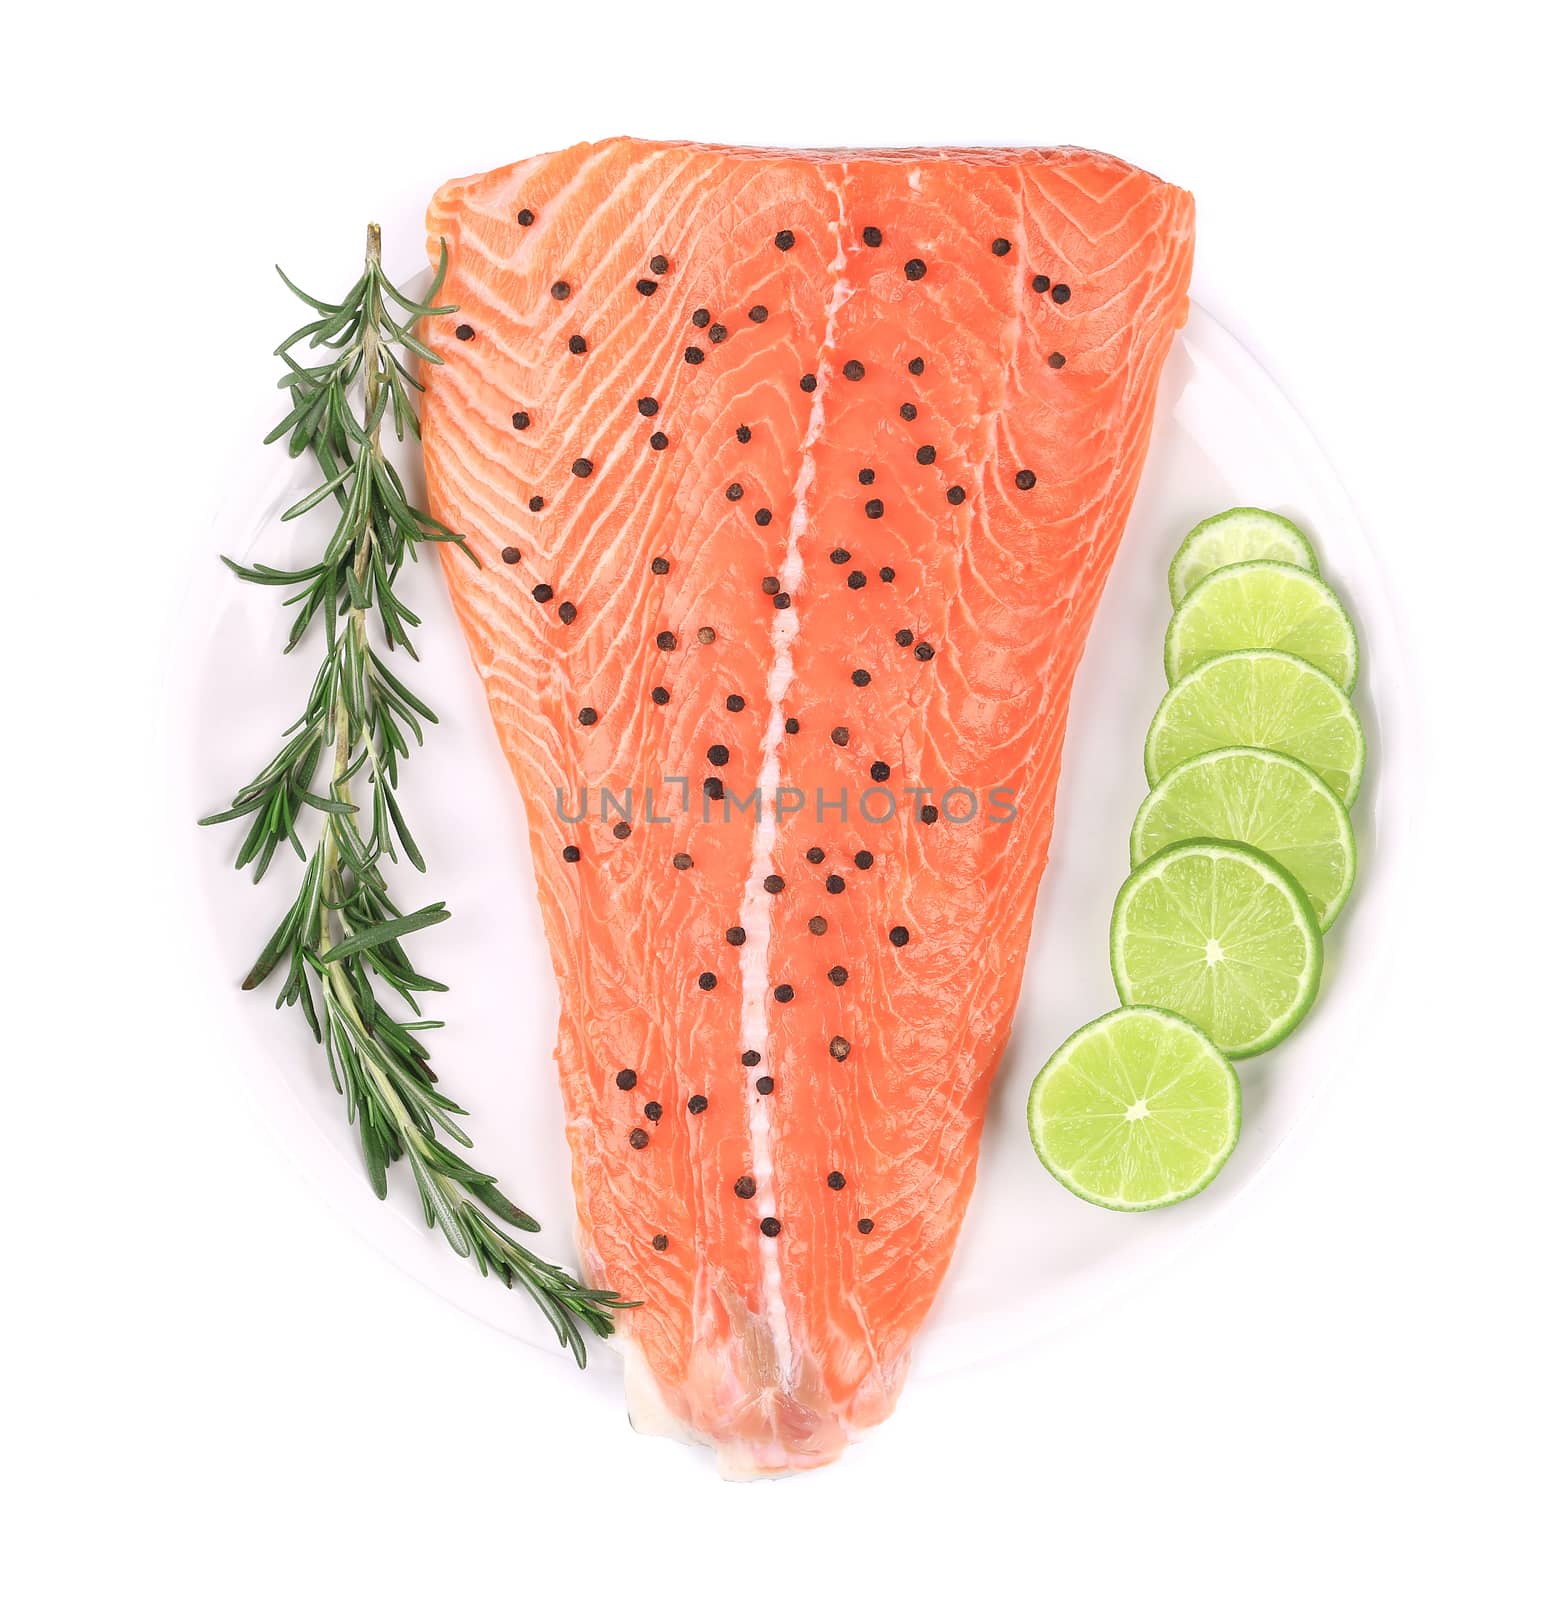 Salmon fillet with lime and rosemary. Isolated on a white background.